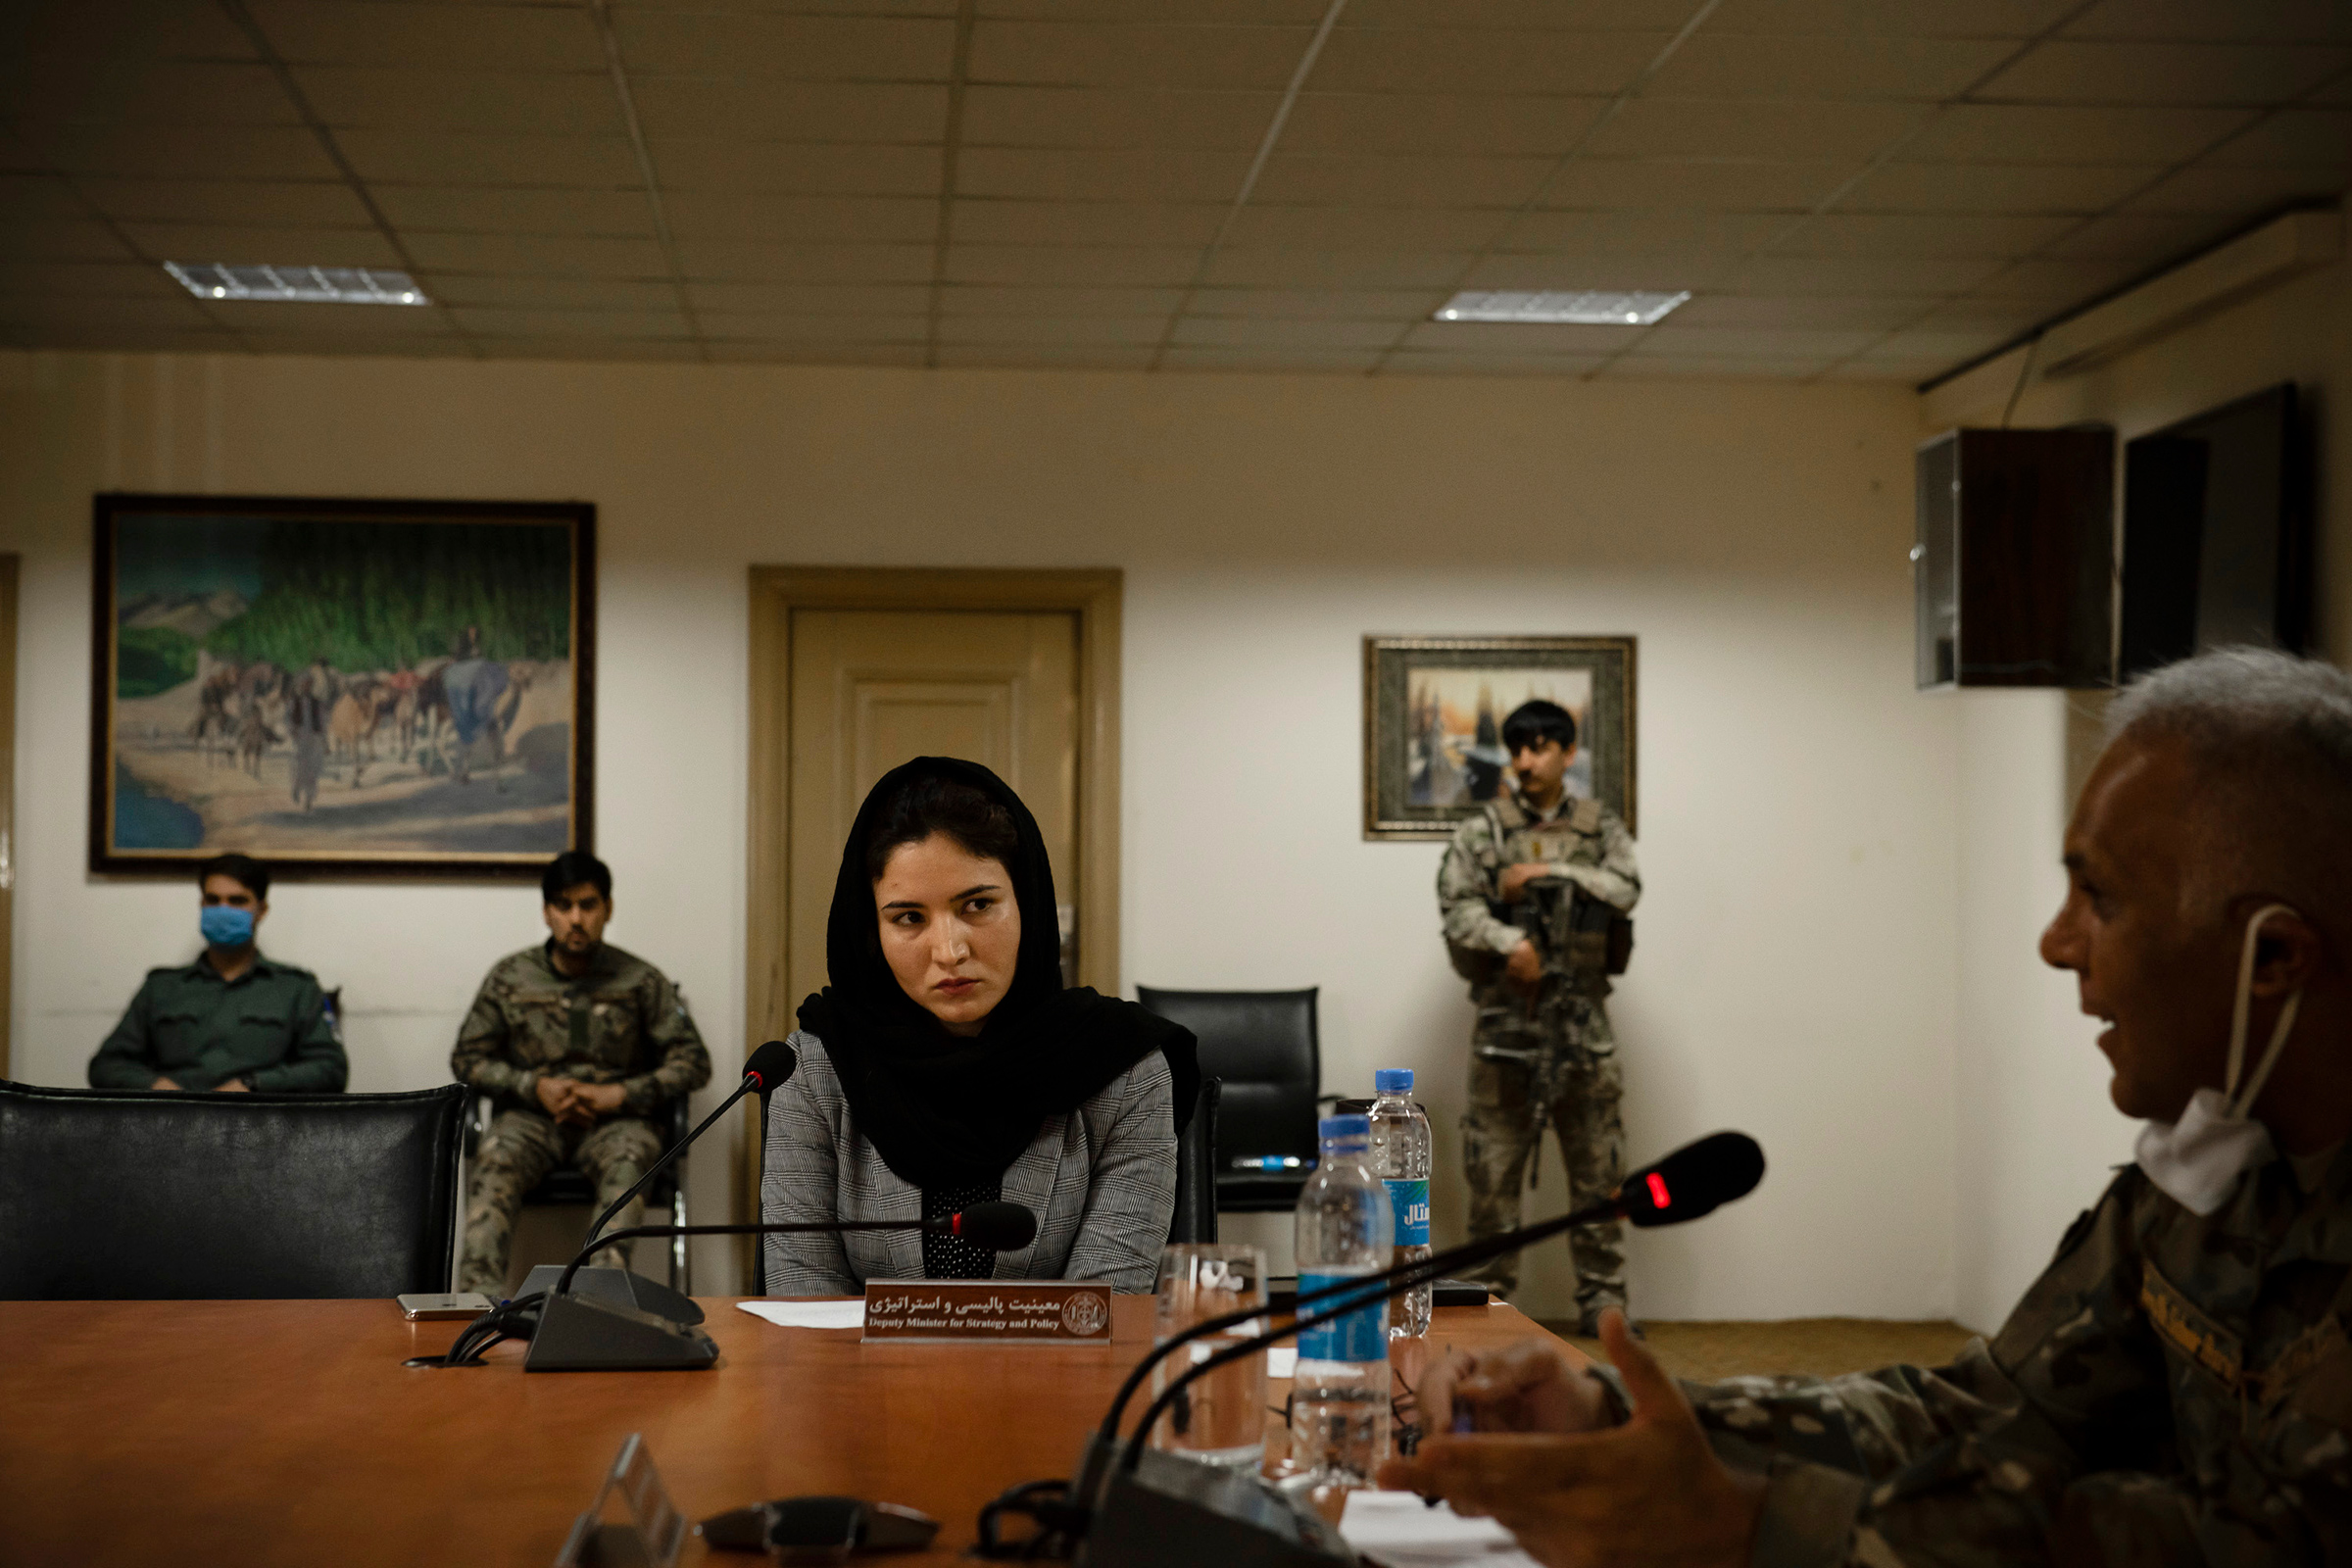 Hosna Jalil, then deputy minister of the interior, at a government meeting where only one other woman, Kabul's deputy governor, was present, in Kabul on June 20, 2020. (Kiana Hayeri—The New York Times/Redux)